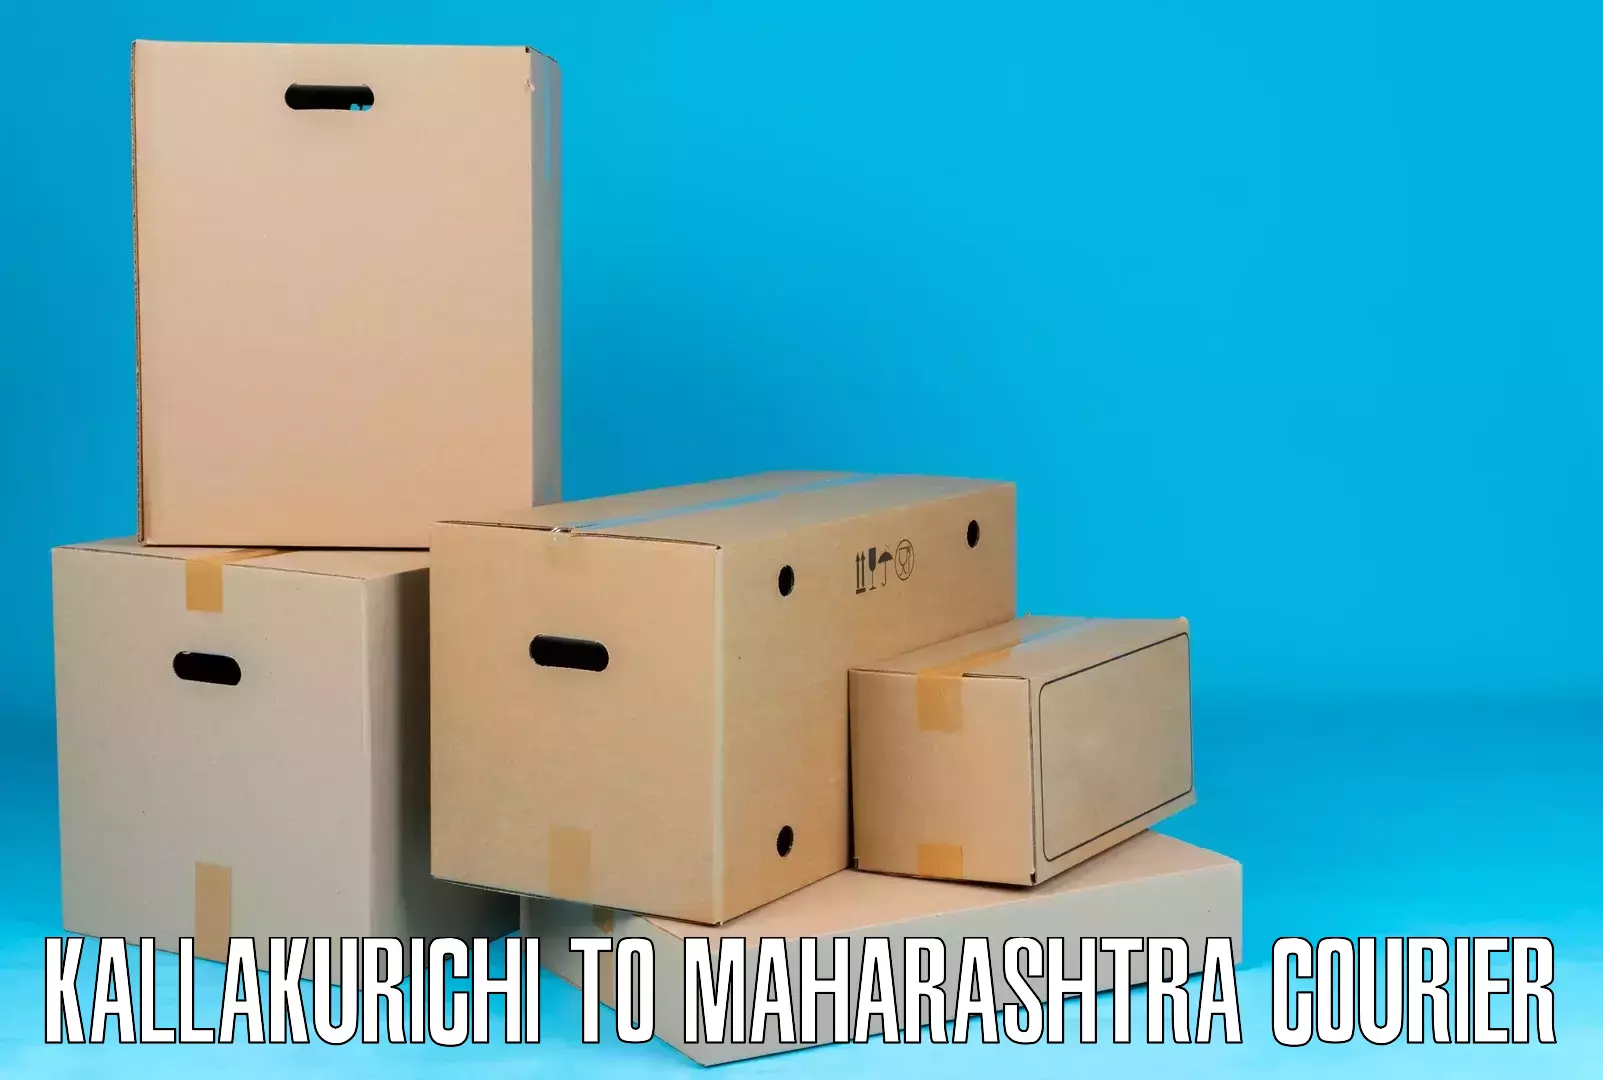 Small parcel delivery in Kallakurichi to Chandwad